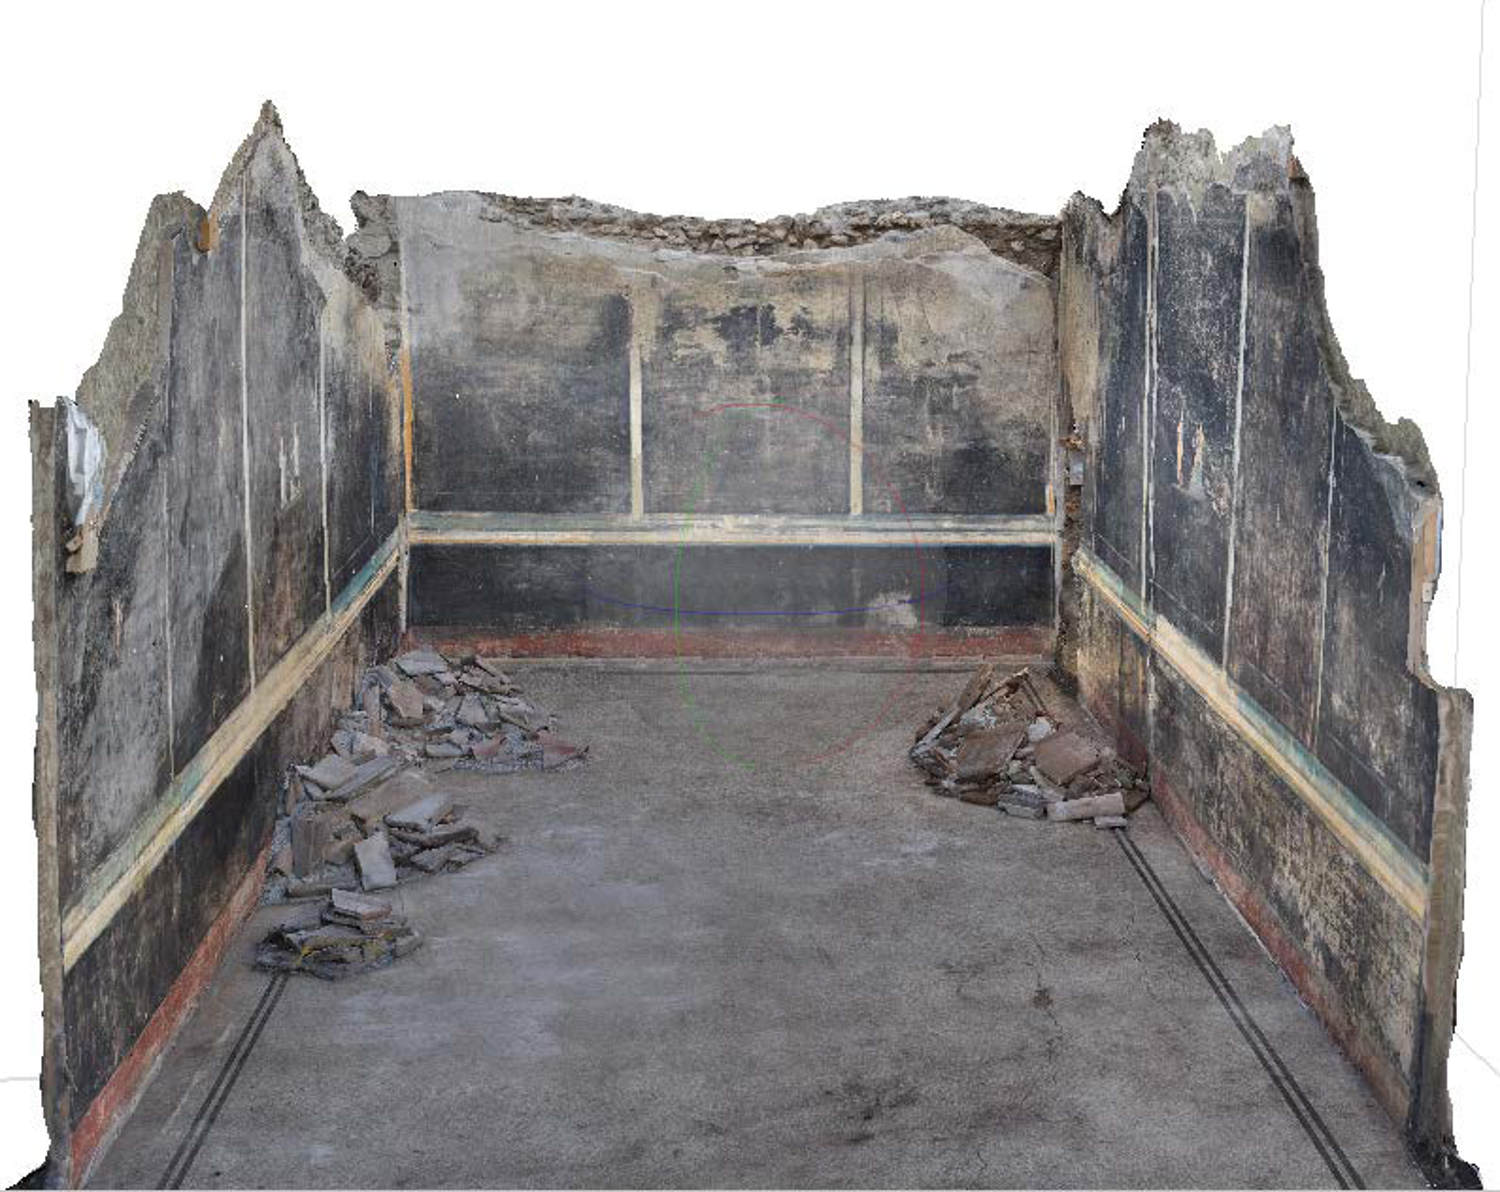 Striking Roman paintings uncovered in Pompeii after nearly 2,000 years